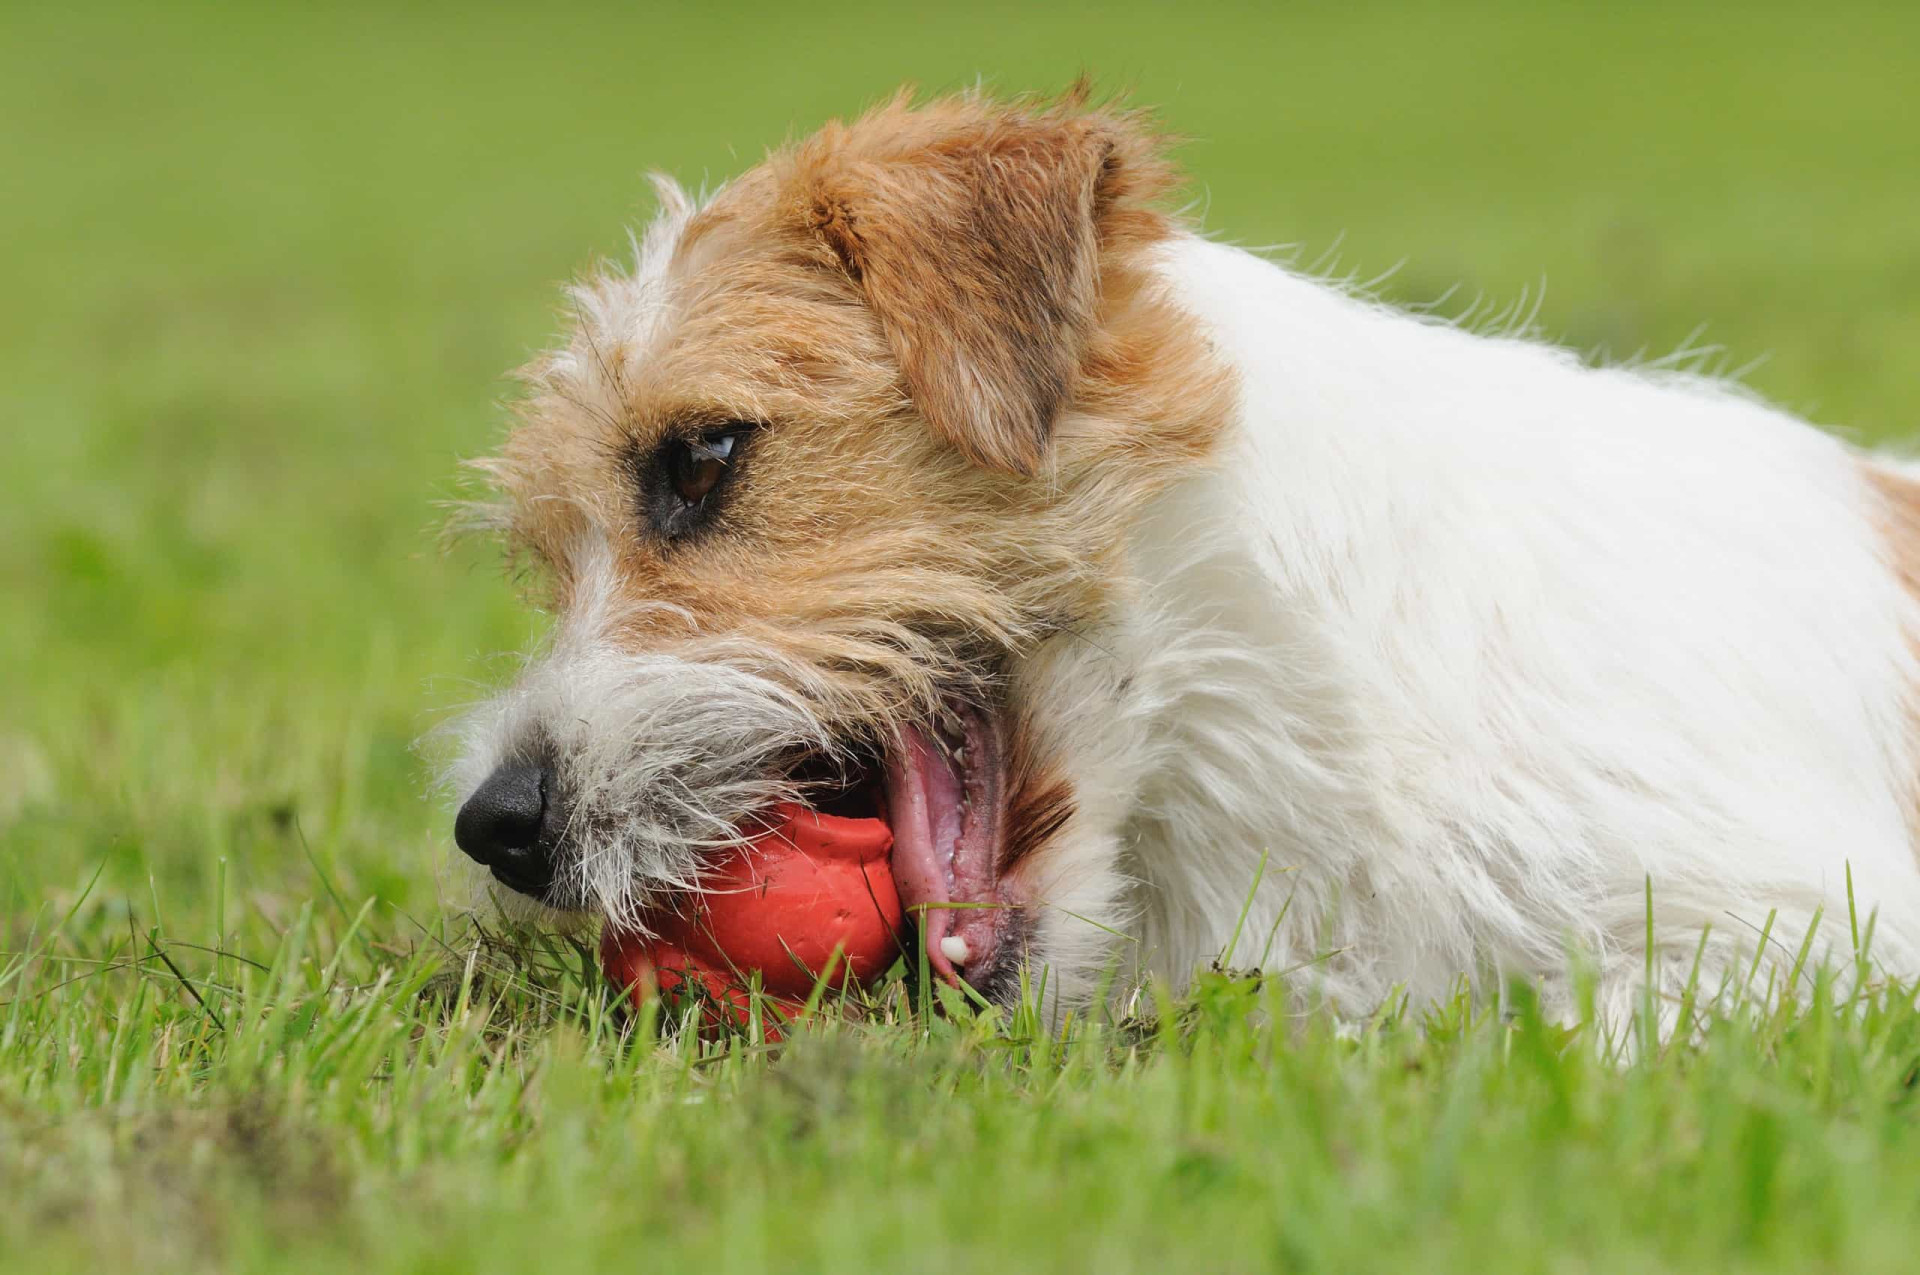 <p>A car trip can be tedious for some dogs, so why not give them something to do? A stuffed Kong or a toy can keep them entertained for a while.</p><p><a href="https://www.msn.com/en-us/community/channel/vid-7xx8mnucu55yw63we9va2gwr7uihbxwc68fxqp25x6tg4ftibpra?cvid=94631541bc0f4f89bfd59158d696ad7e">Follow us and access great exclusive content every day</a></p>